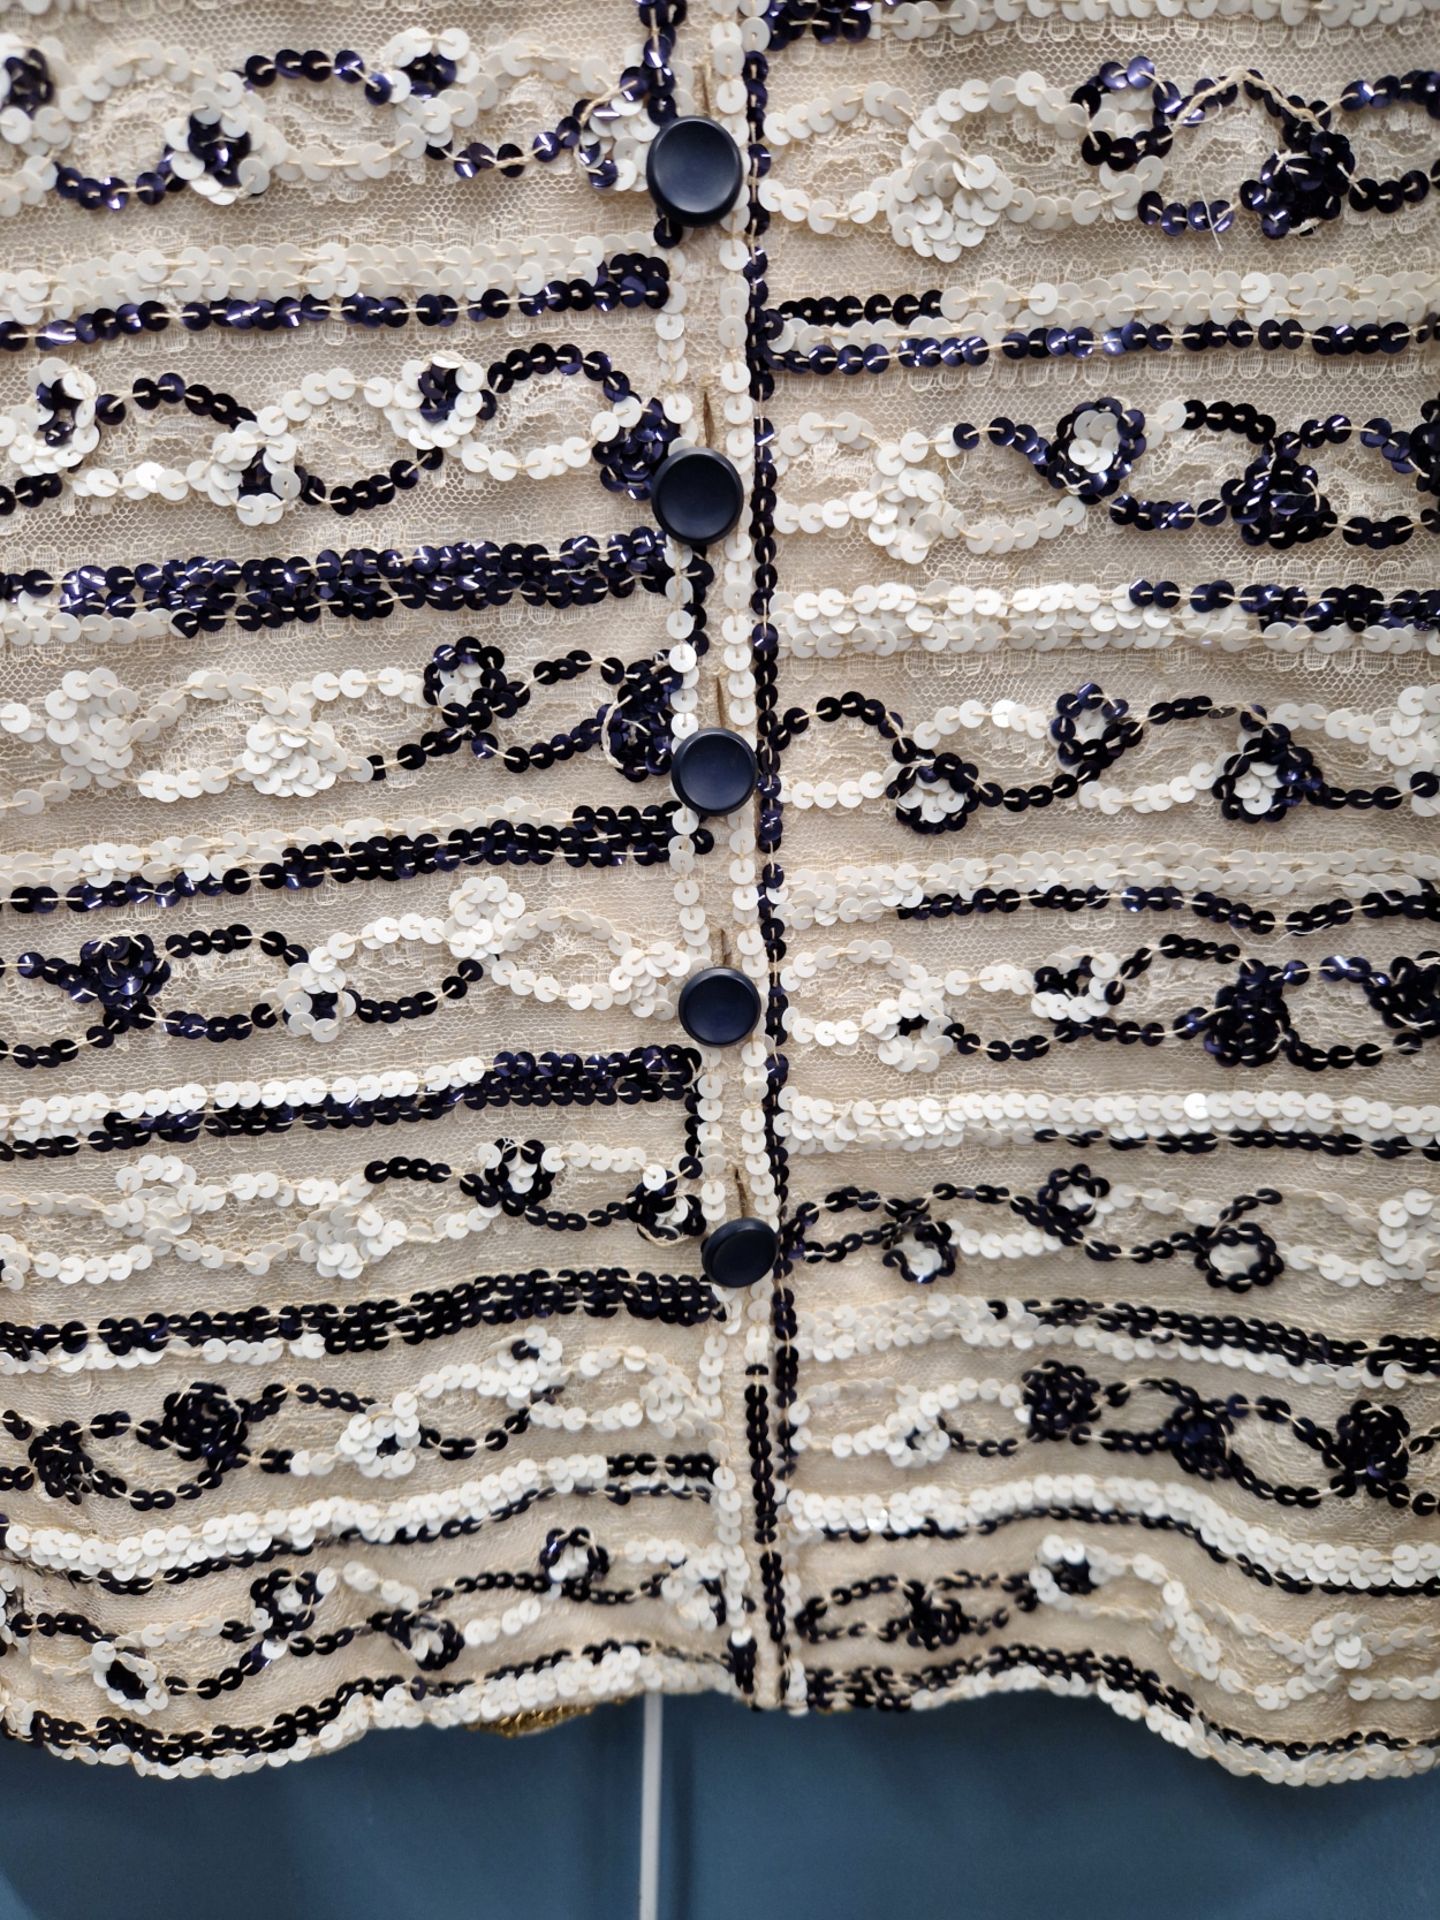 VINTAGE 1970's CHANEL HAUTE COUTURE EMBELLISHED SILK NAVY AND CREAM JACKET. PIT TO PIT 44.5cm - Image 19 of 31